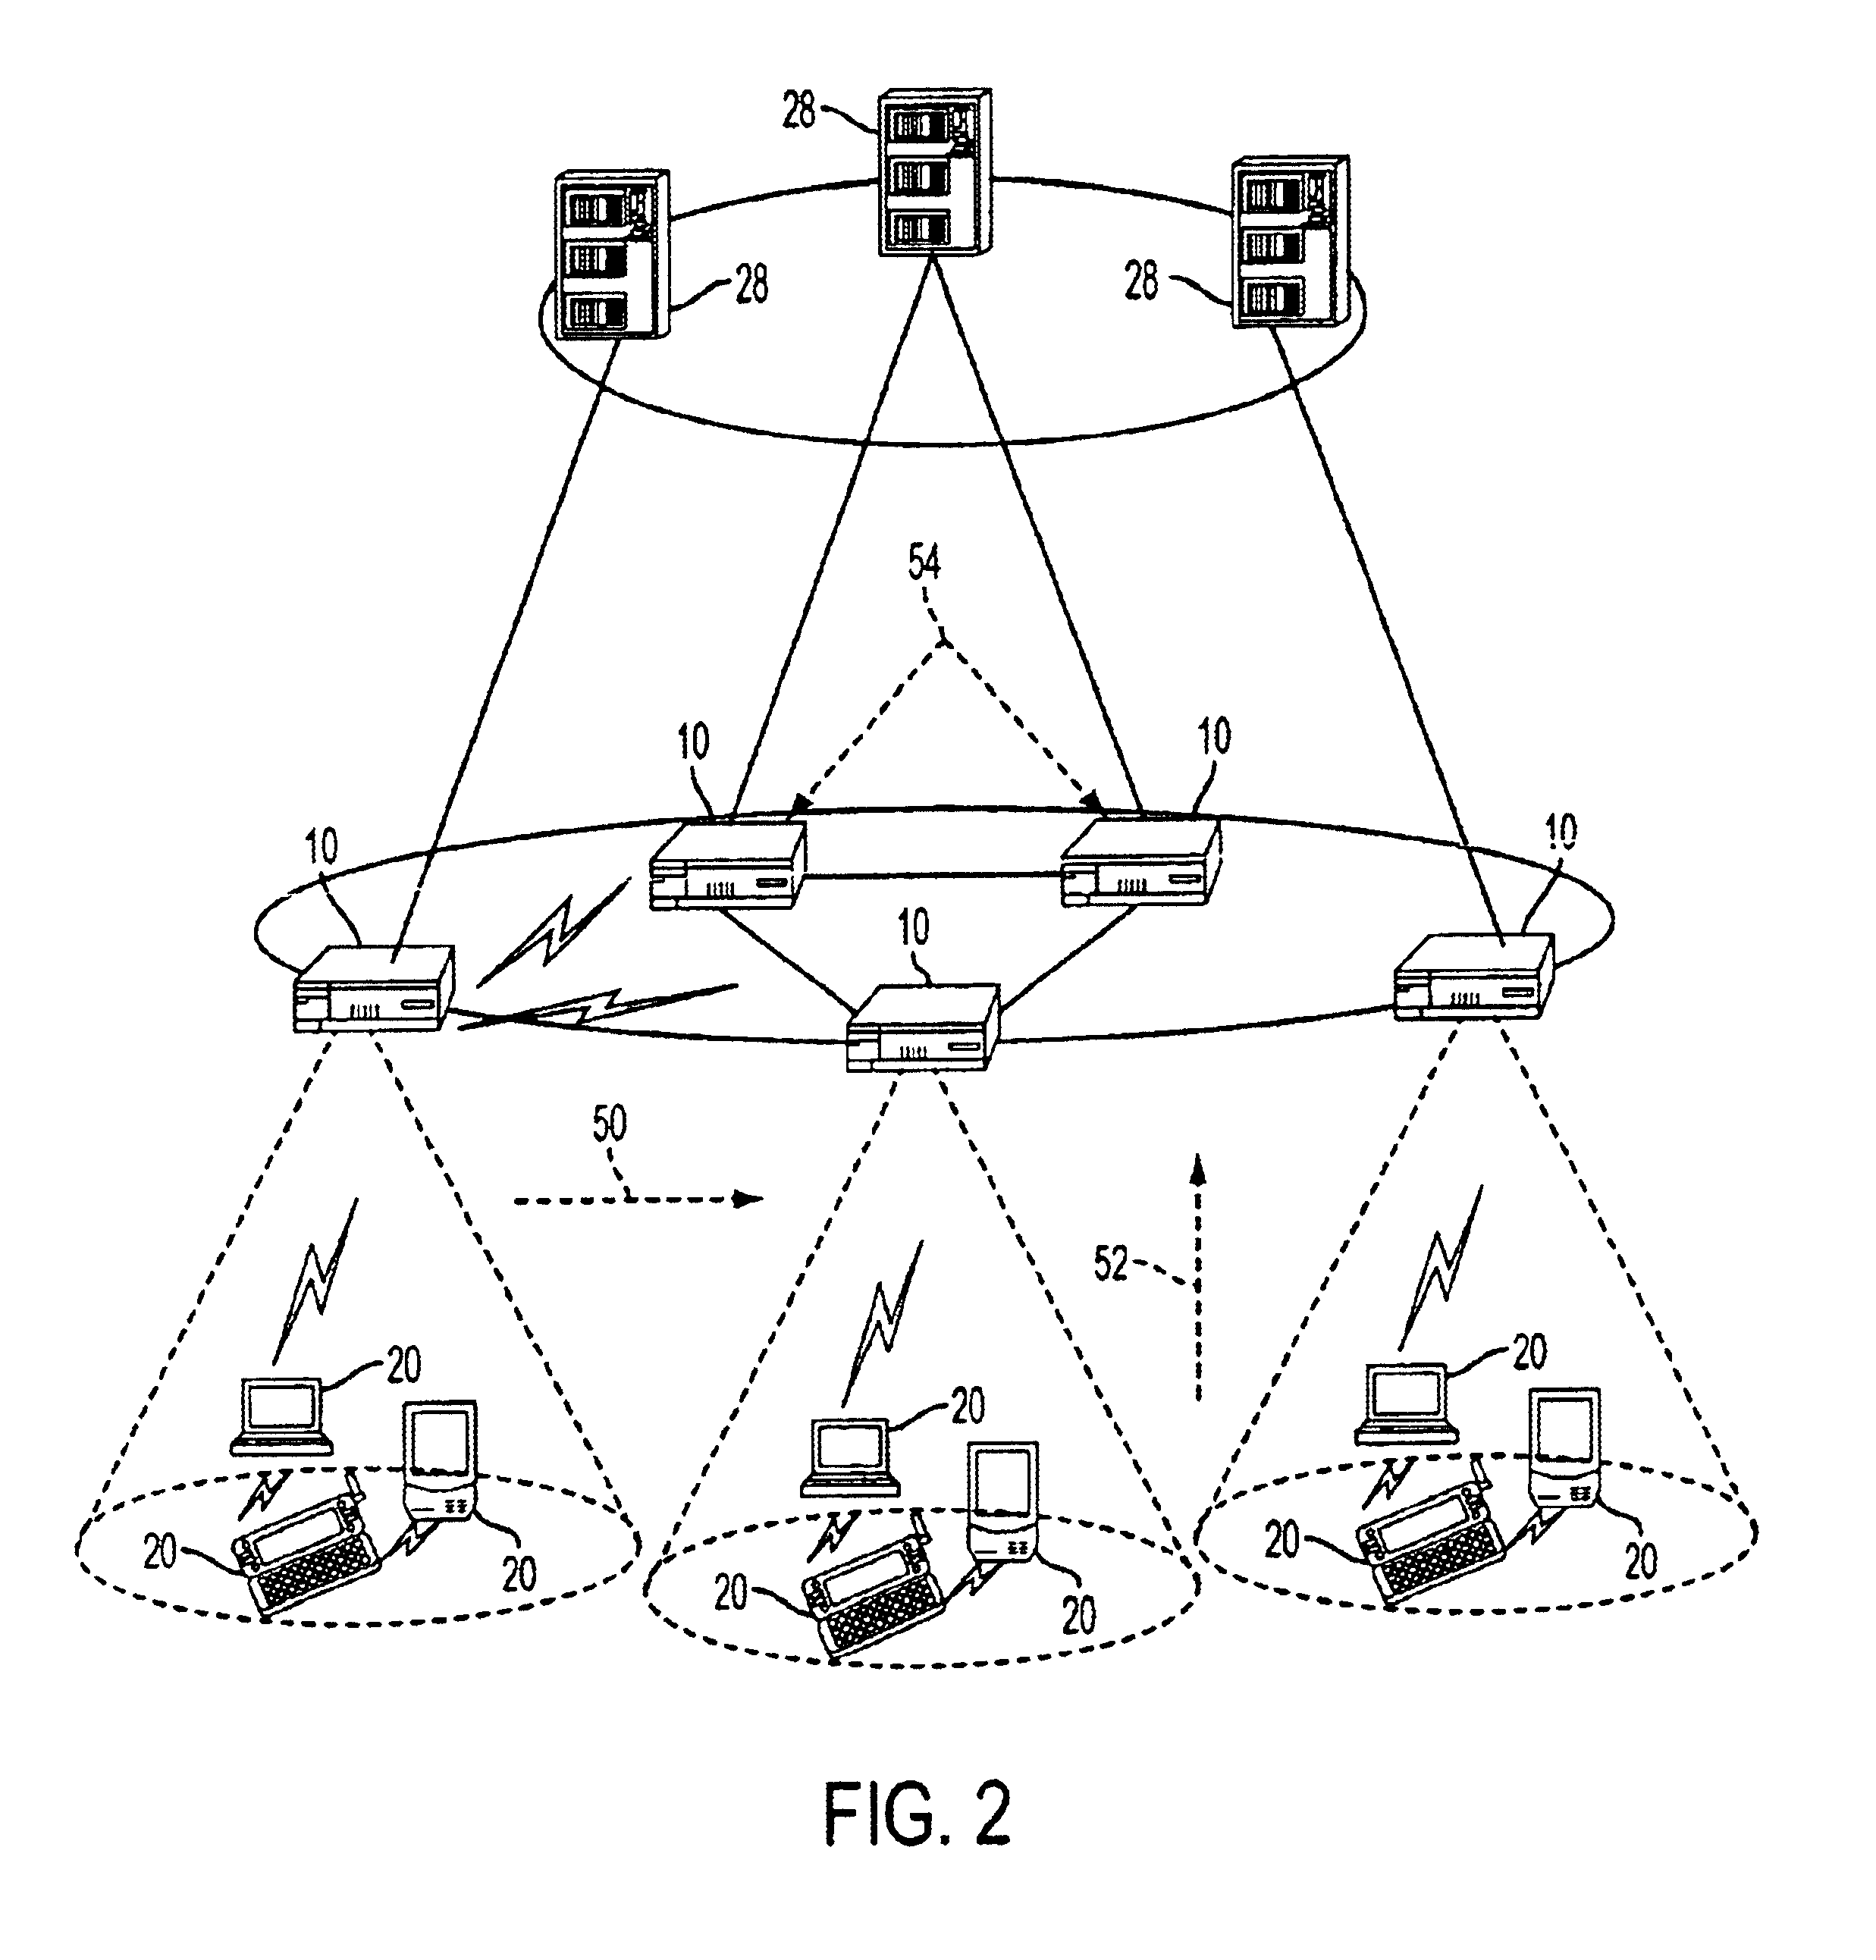 Network-based mobile workgroup system